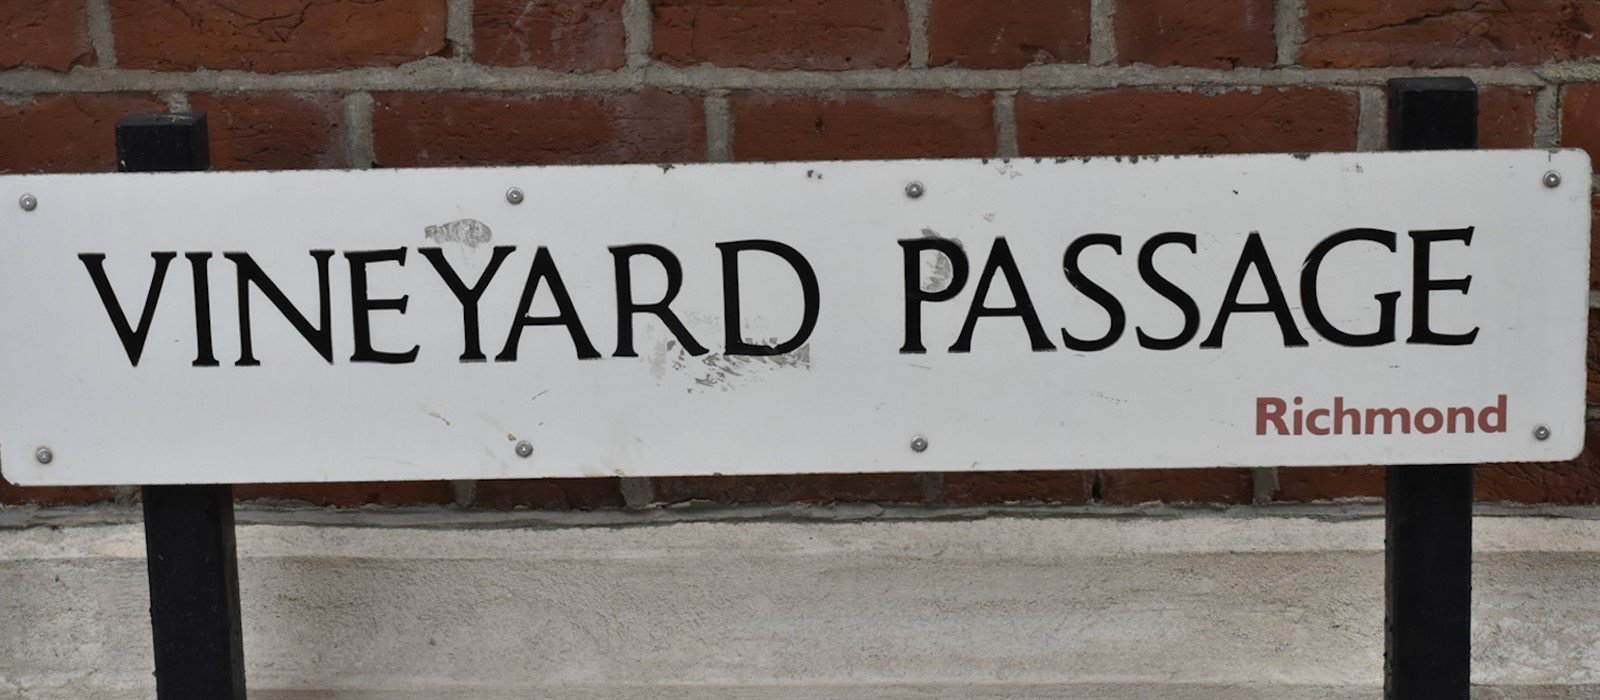 Road sign for Vineyard Passage